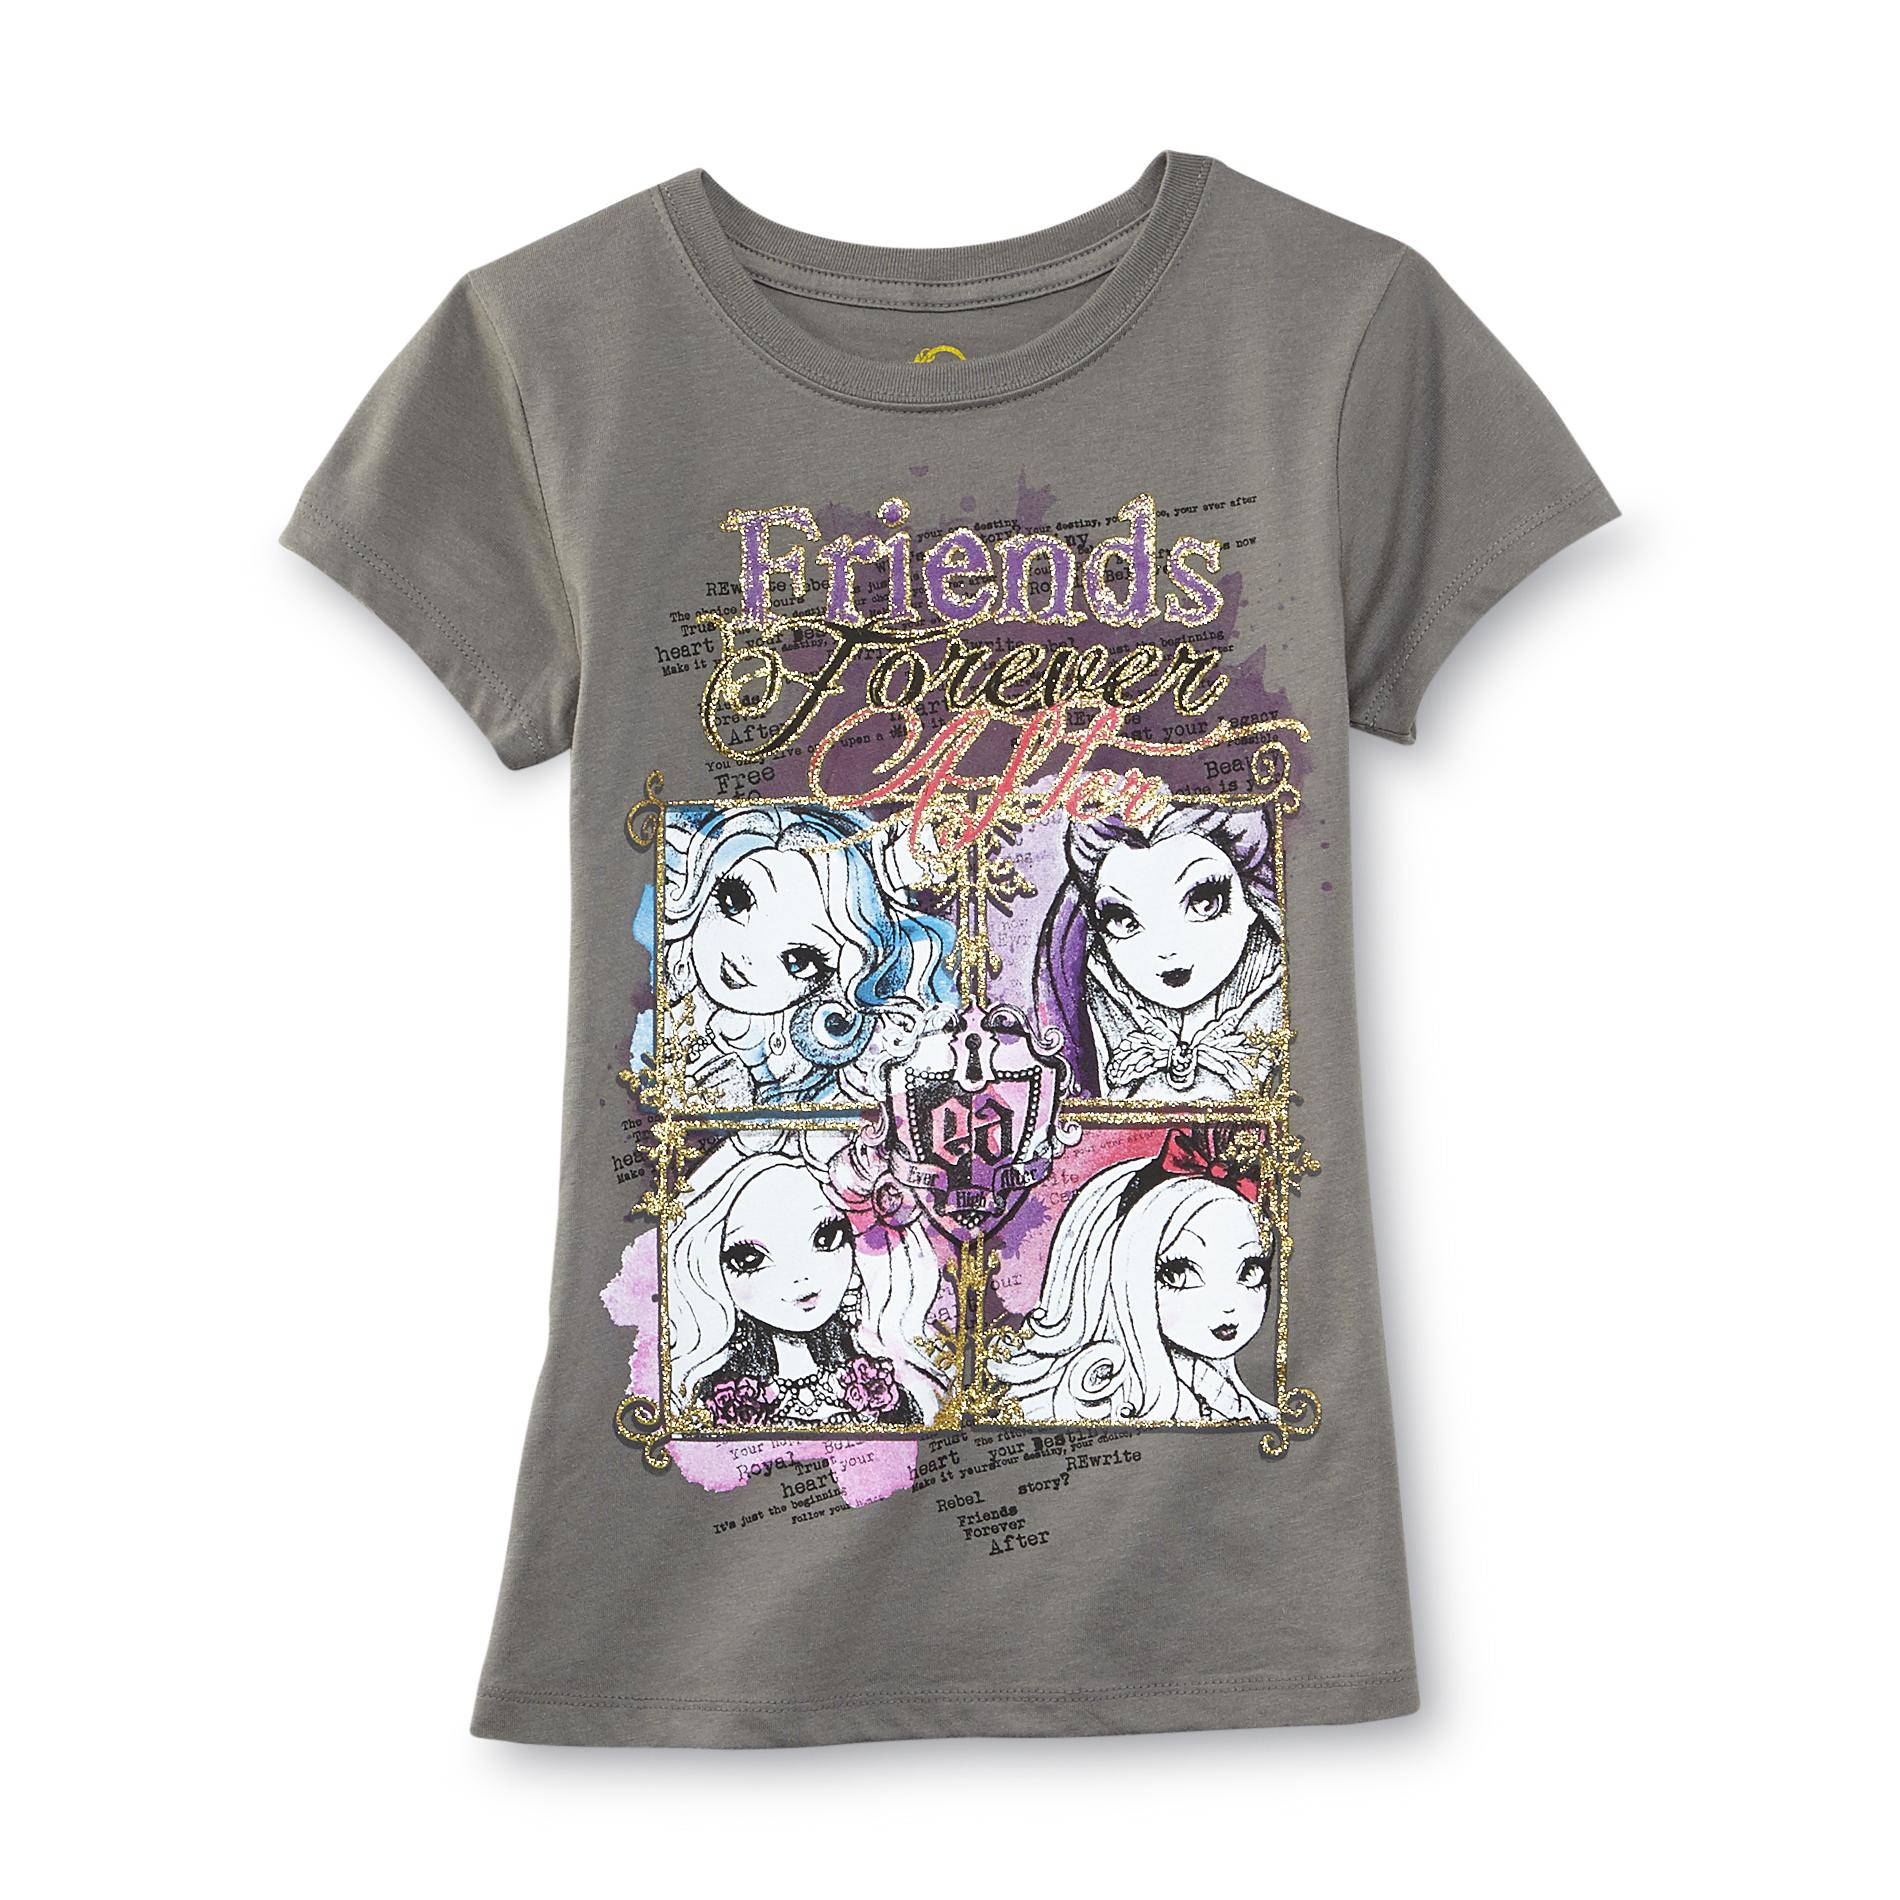 Ever After High Girl's Graphic T-Shirt - Friends